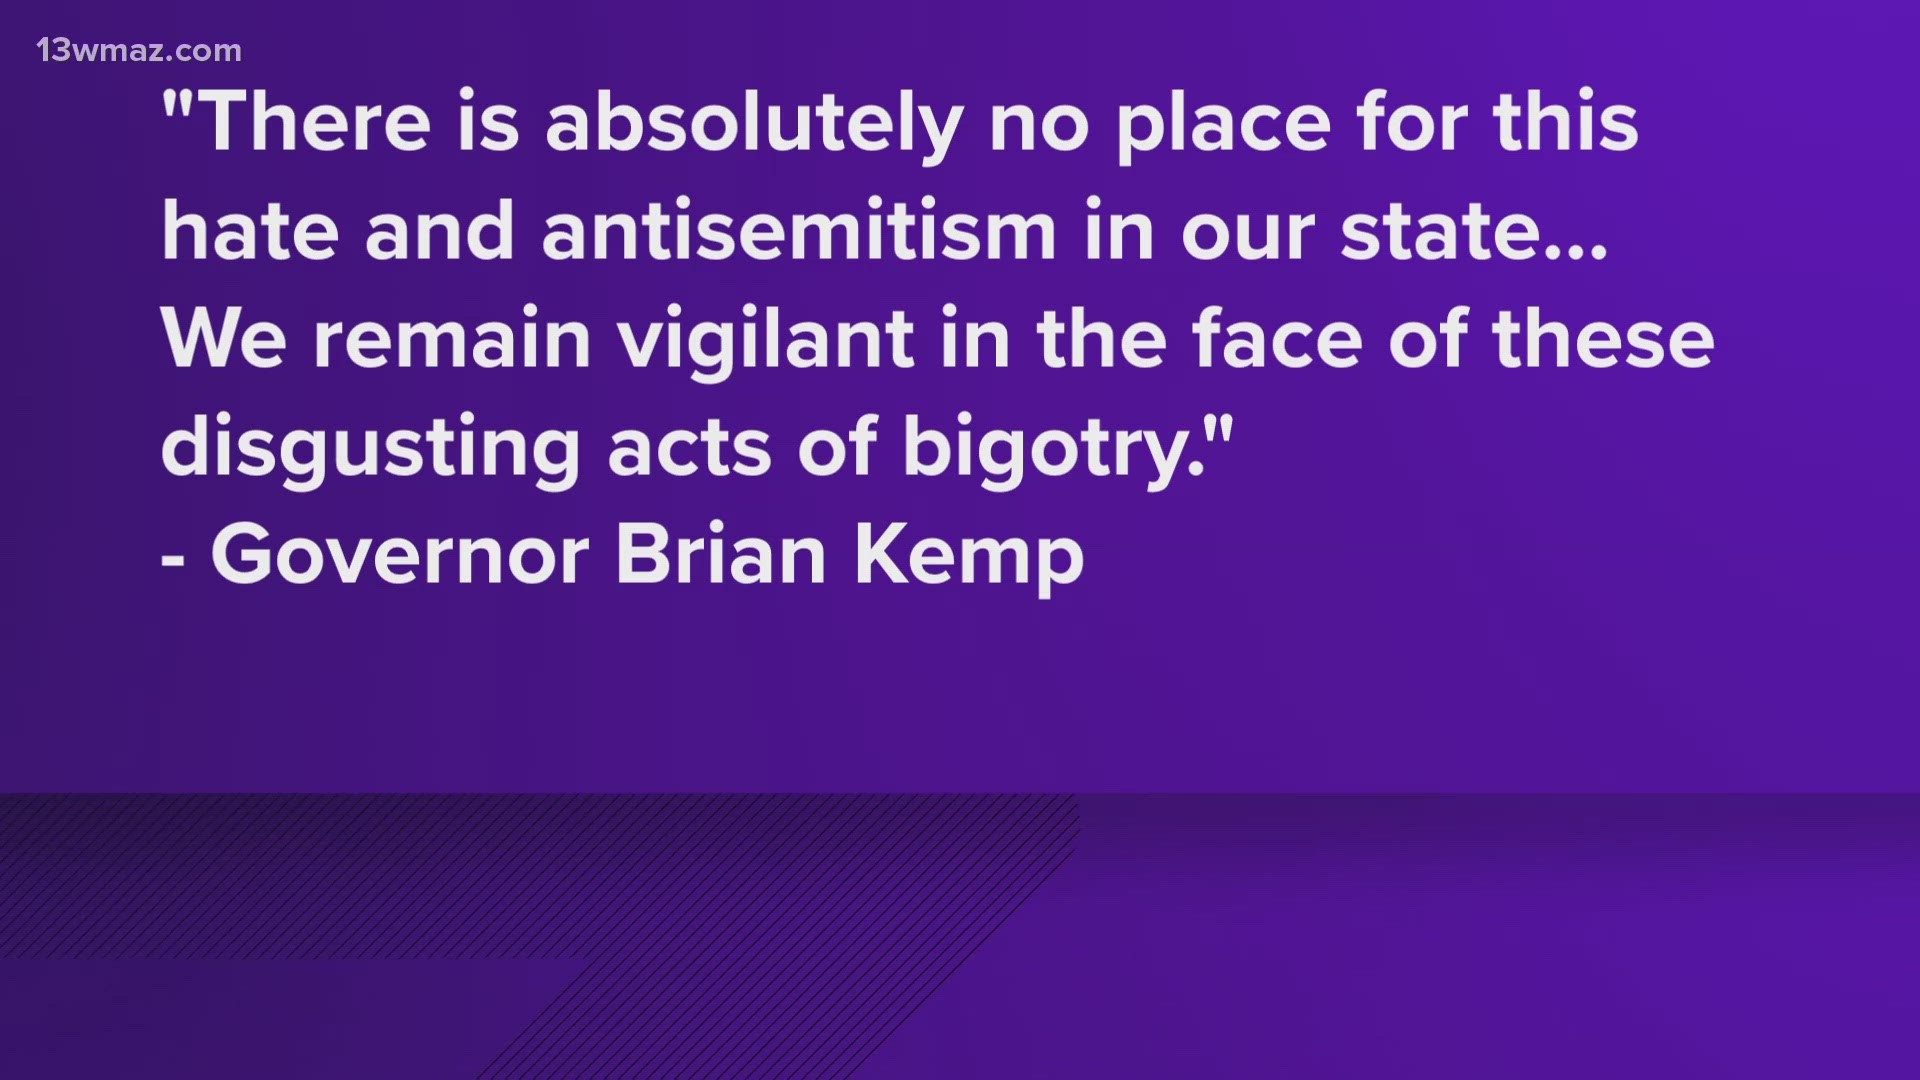 "There is absolutely no place for this hate and antisemitism in our state," Governor Brian Kemp said in a tweet.